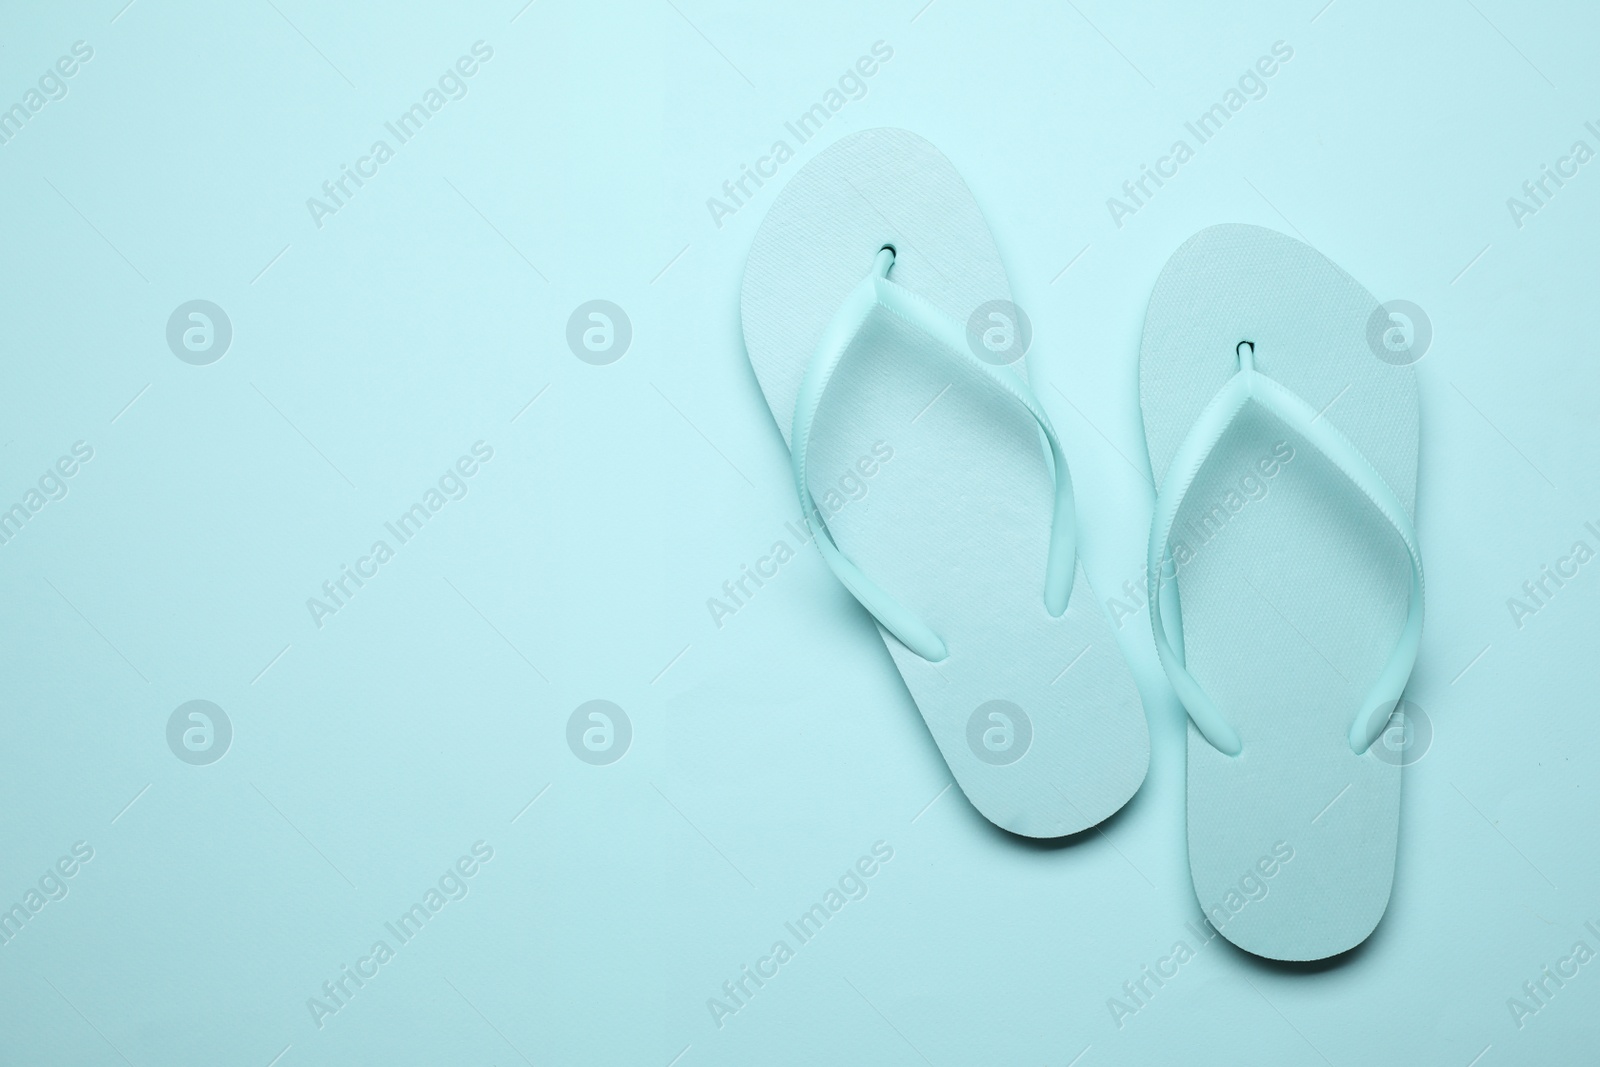 Photo of Pair of stylish flip flops on light blue background, top view with space for text. Beach objects